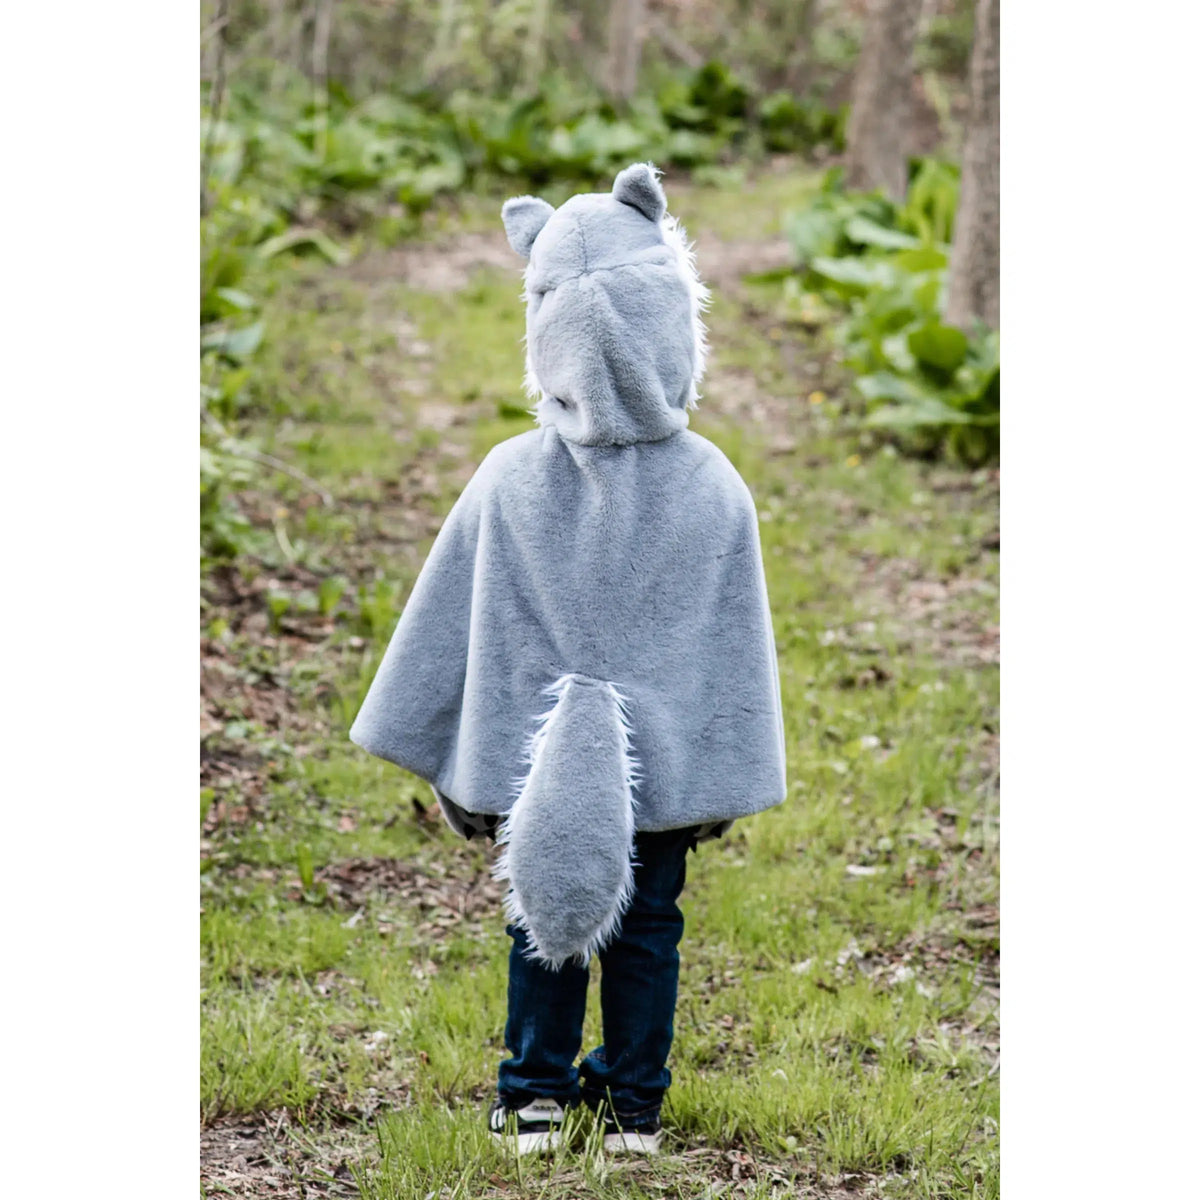 Child in woods, wearing a grey and white wolf cape, from behind.